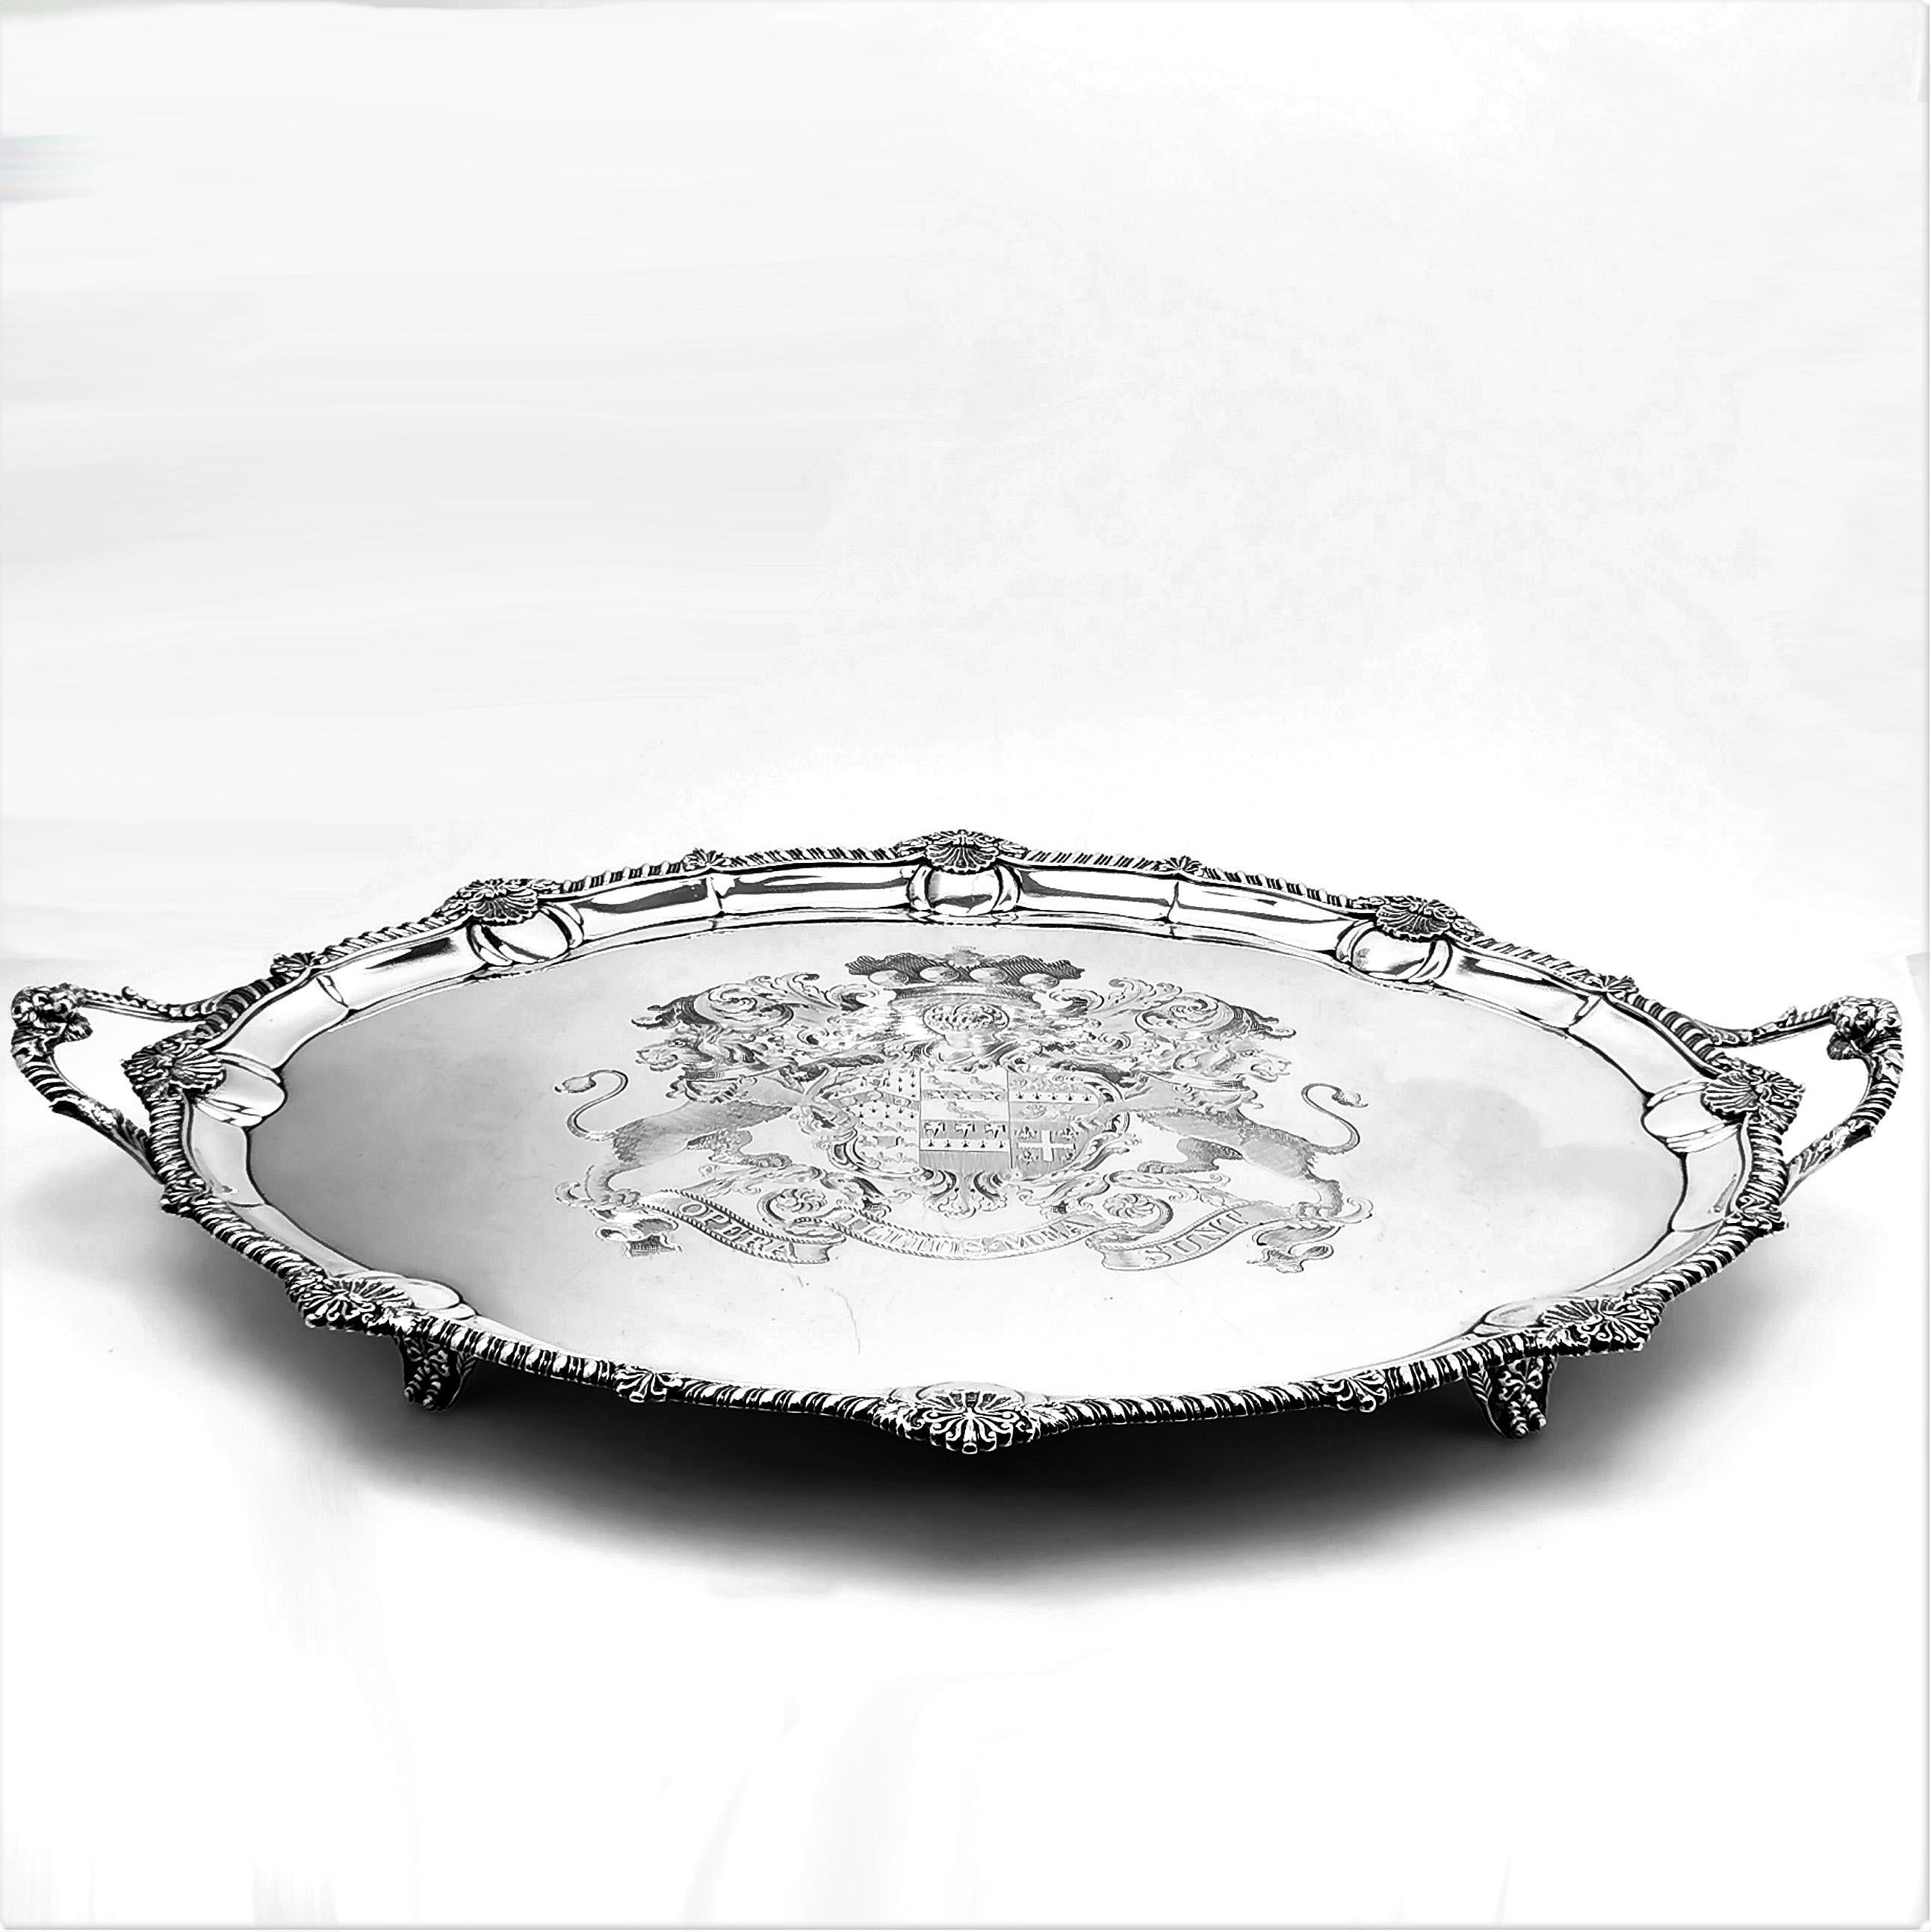 The Brownlow Tray 1809 Very Large Antique Georgian Silver Tray Serving Tea 1